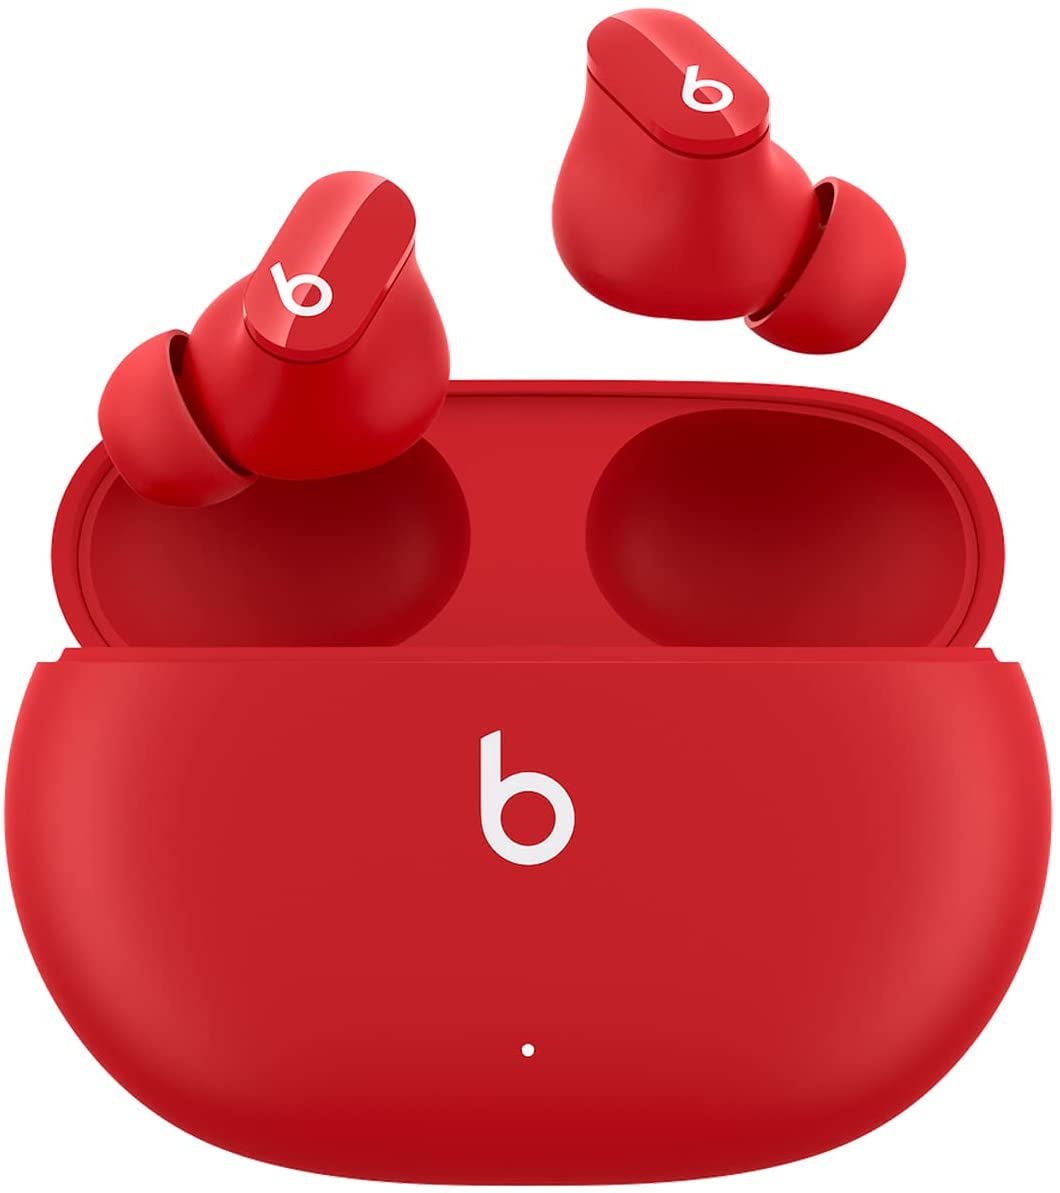 Beats Studio Buds Totally Wireless Noise Cancelling Earphones - Red (Pre-Owned)